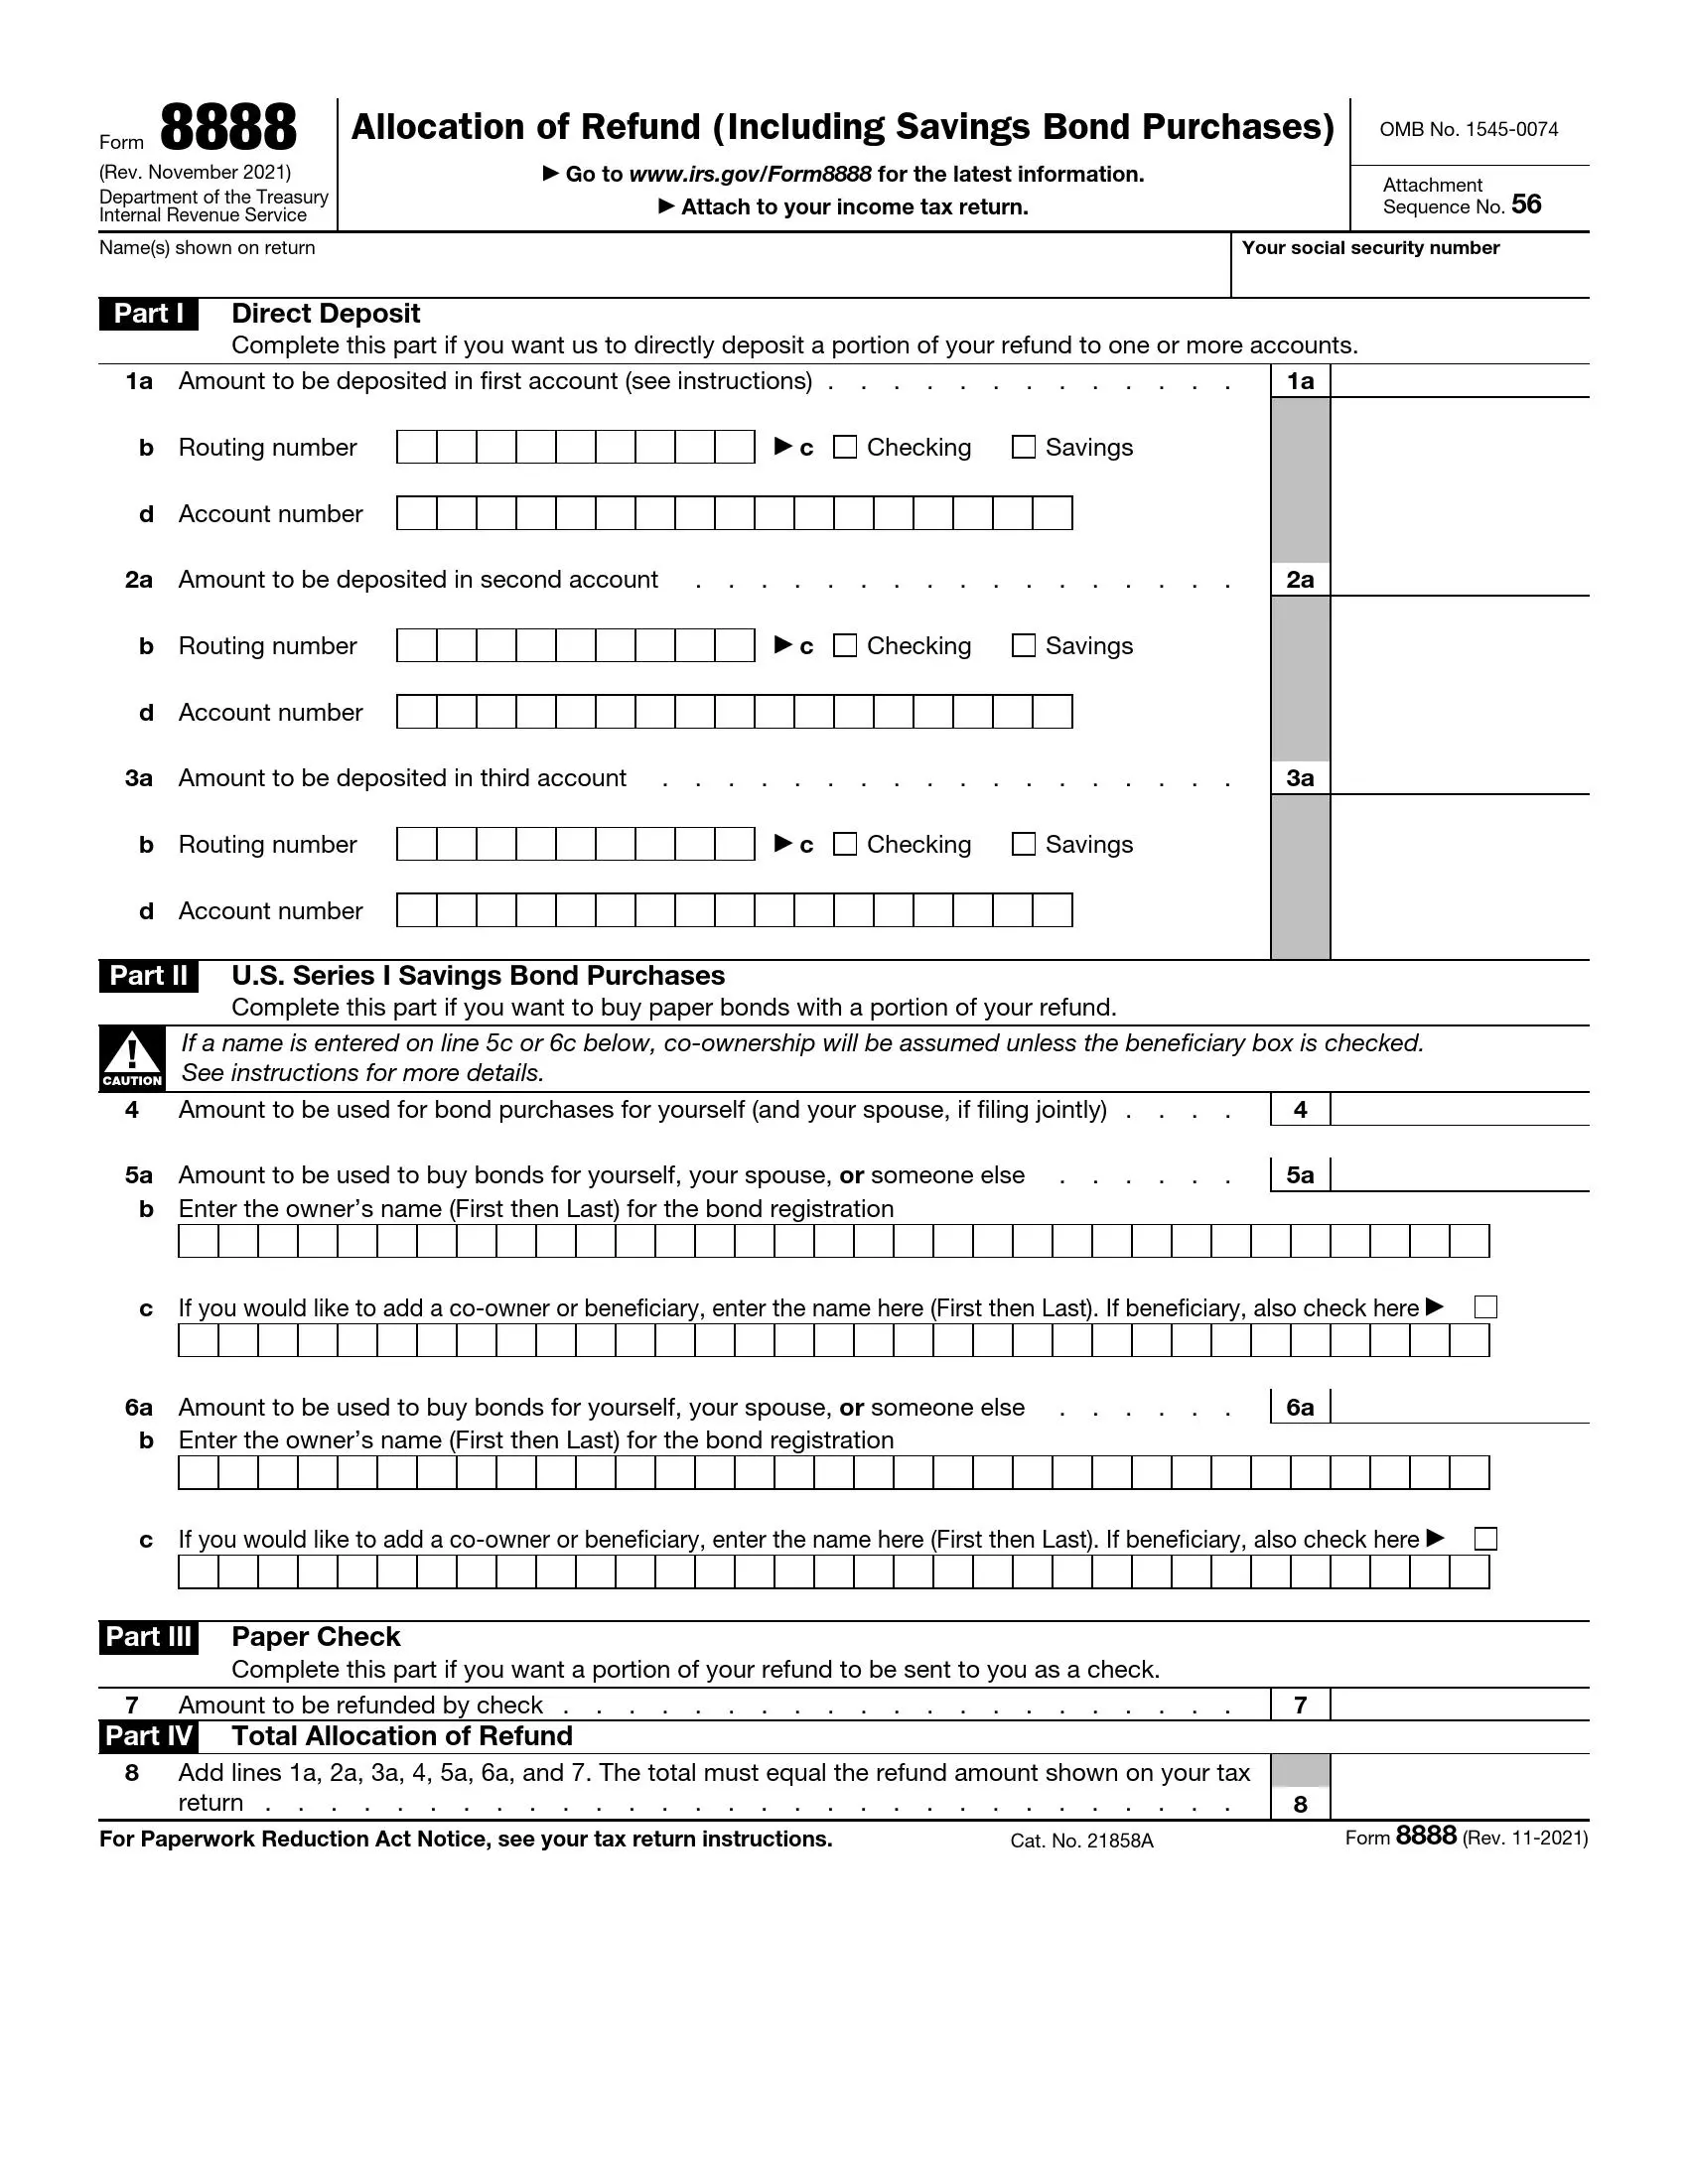 irs form 8888 rev 11 2021 preview